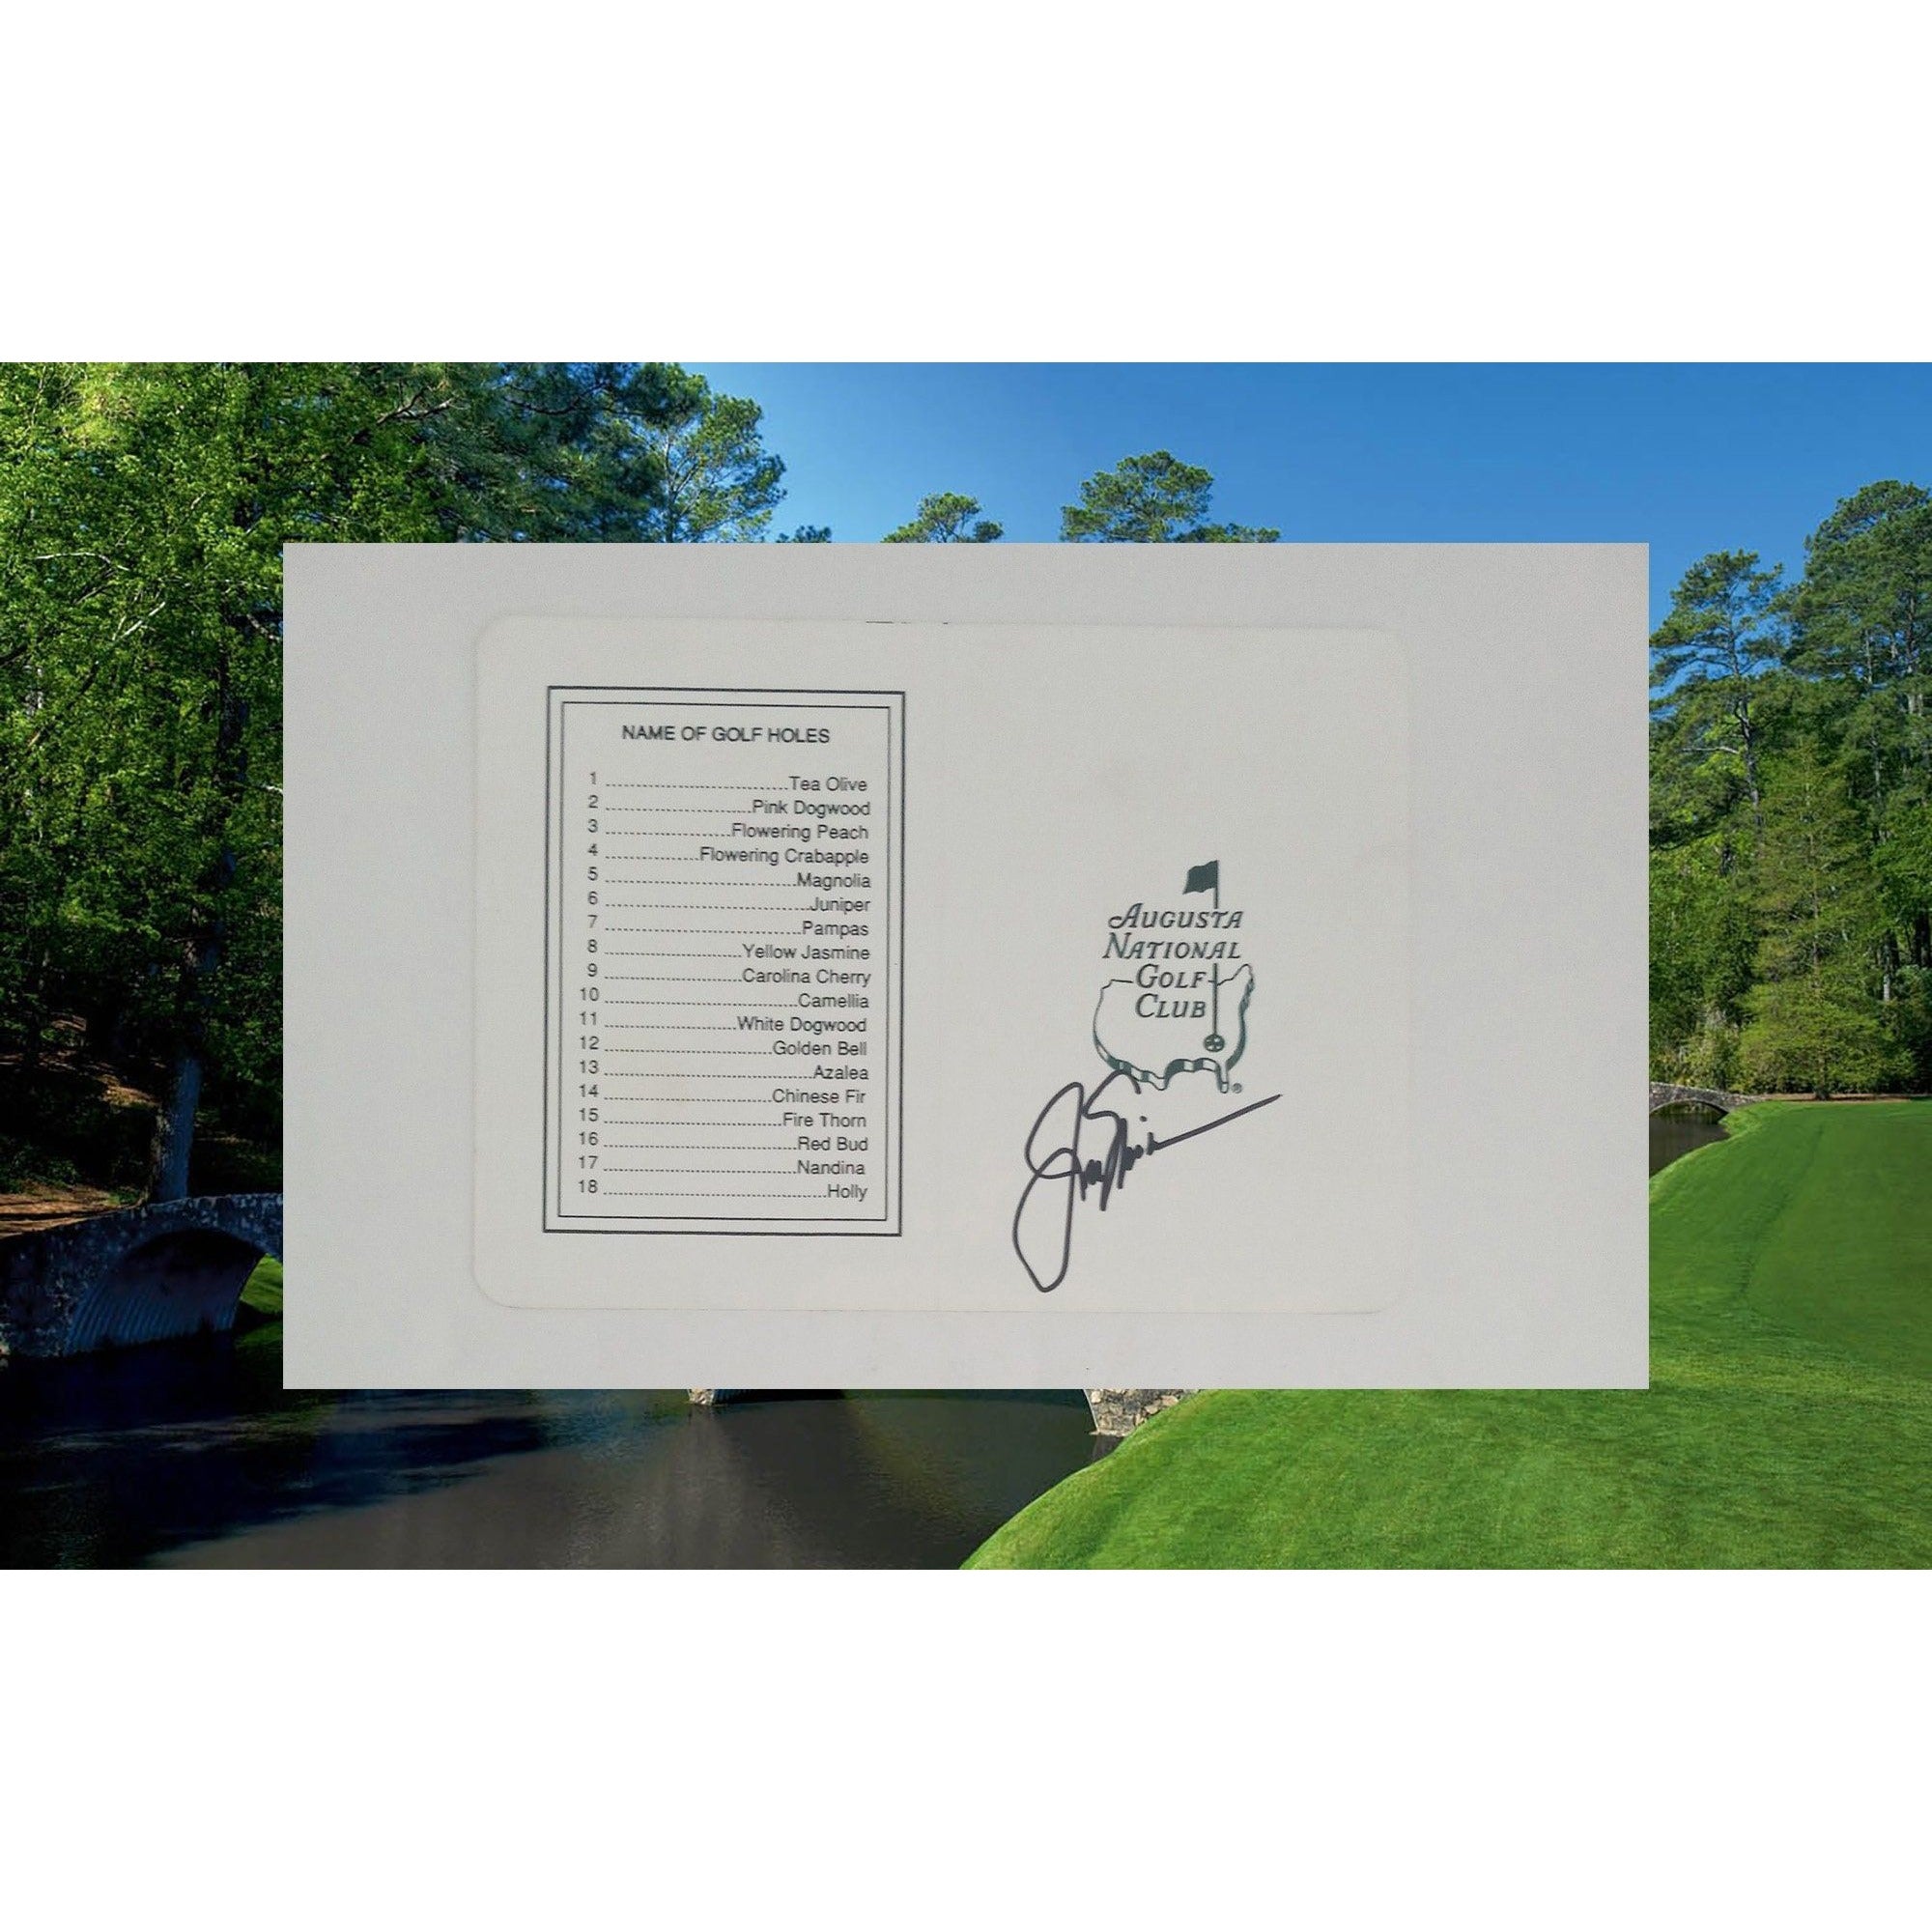 Jack Nicklaus Masters scorecard signed with proof